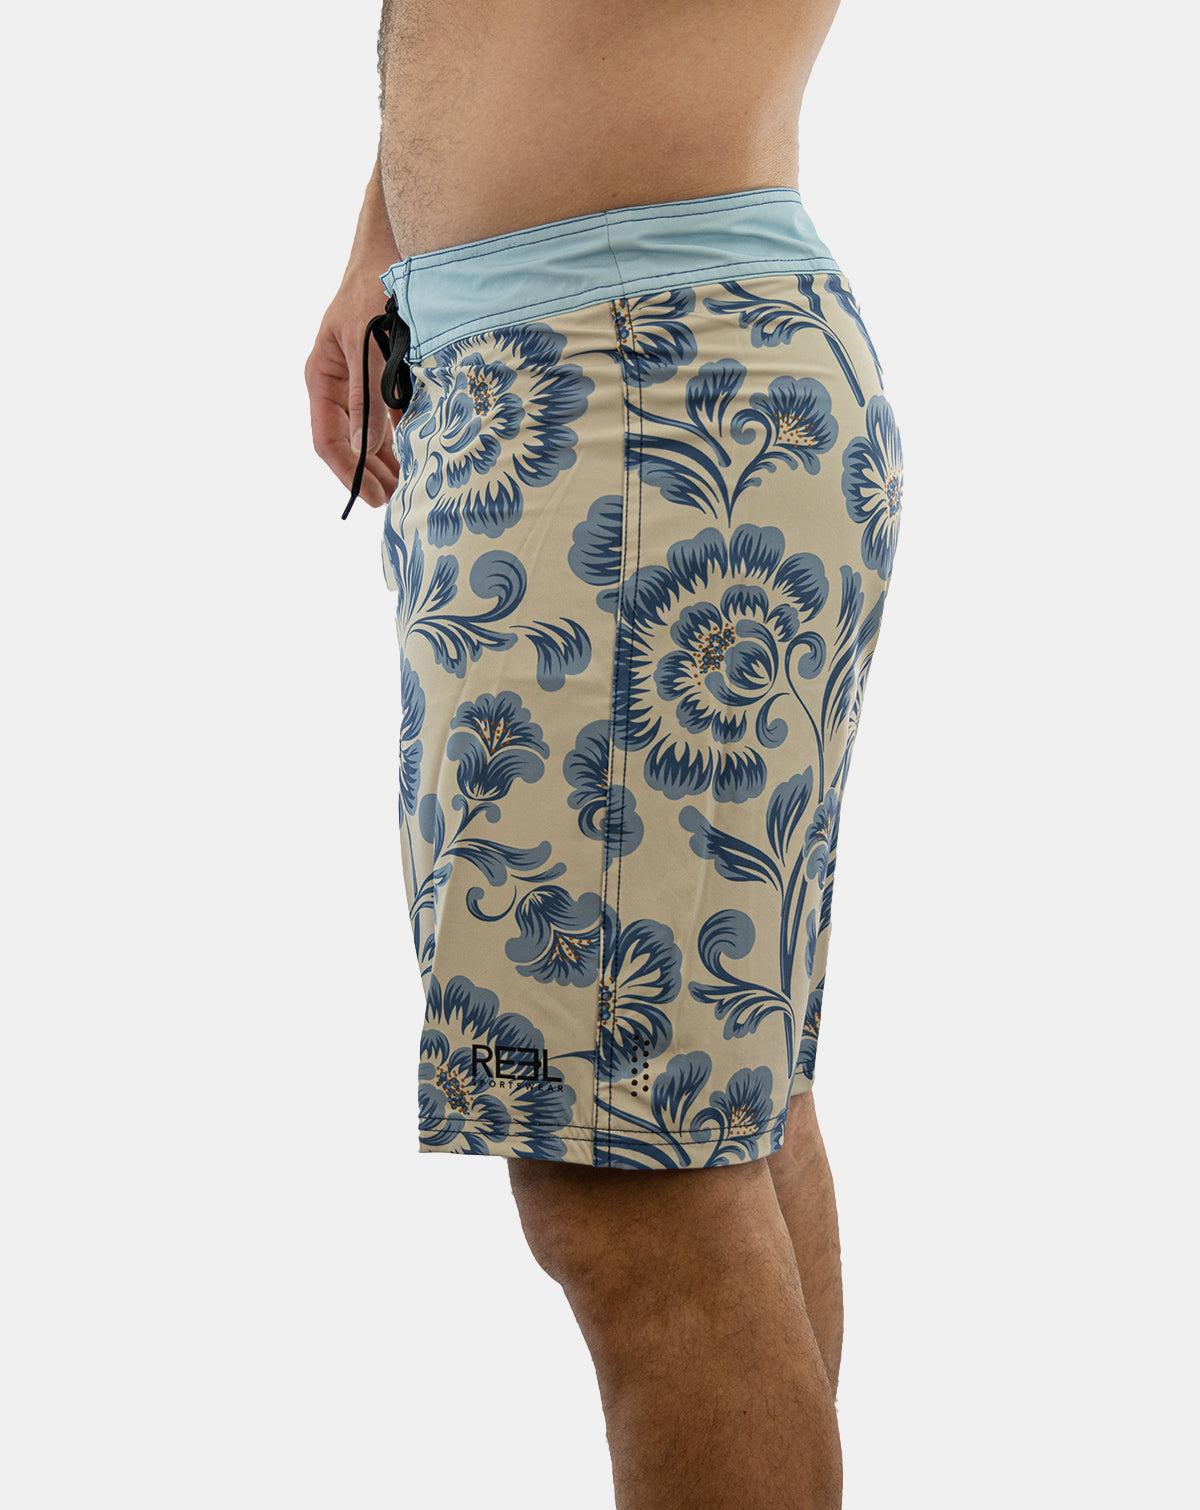 Stylish Sturgill Men&#39;s Boardshorts featuring bold floral print in shades of blue and antique white.